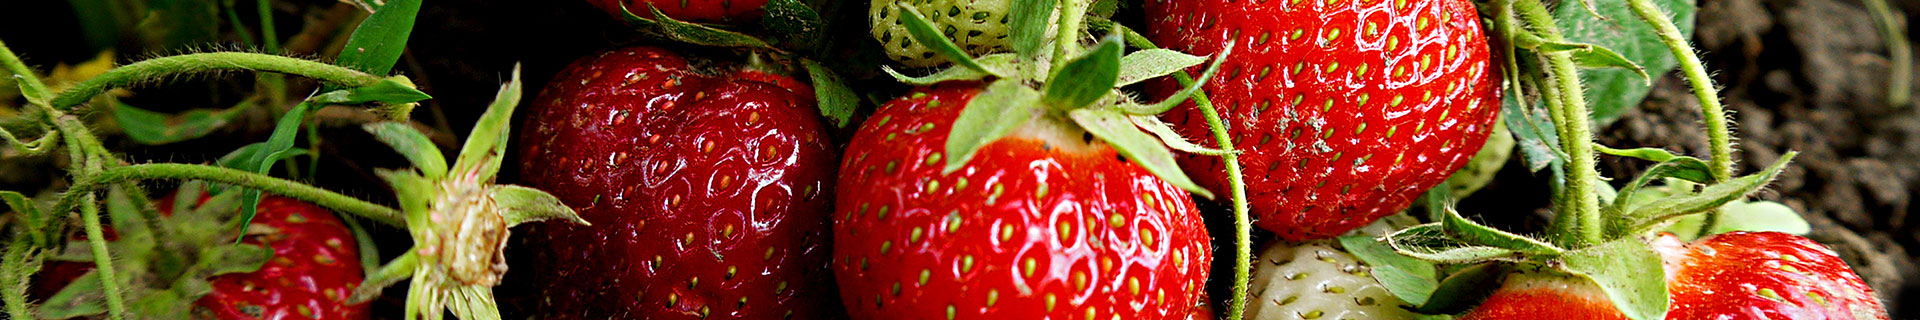 <p>Our secret tips to sweet, home-grown strawberries</p>
